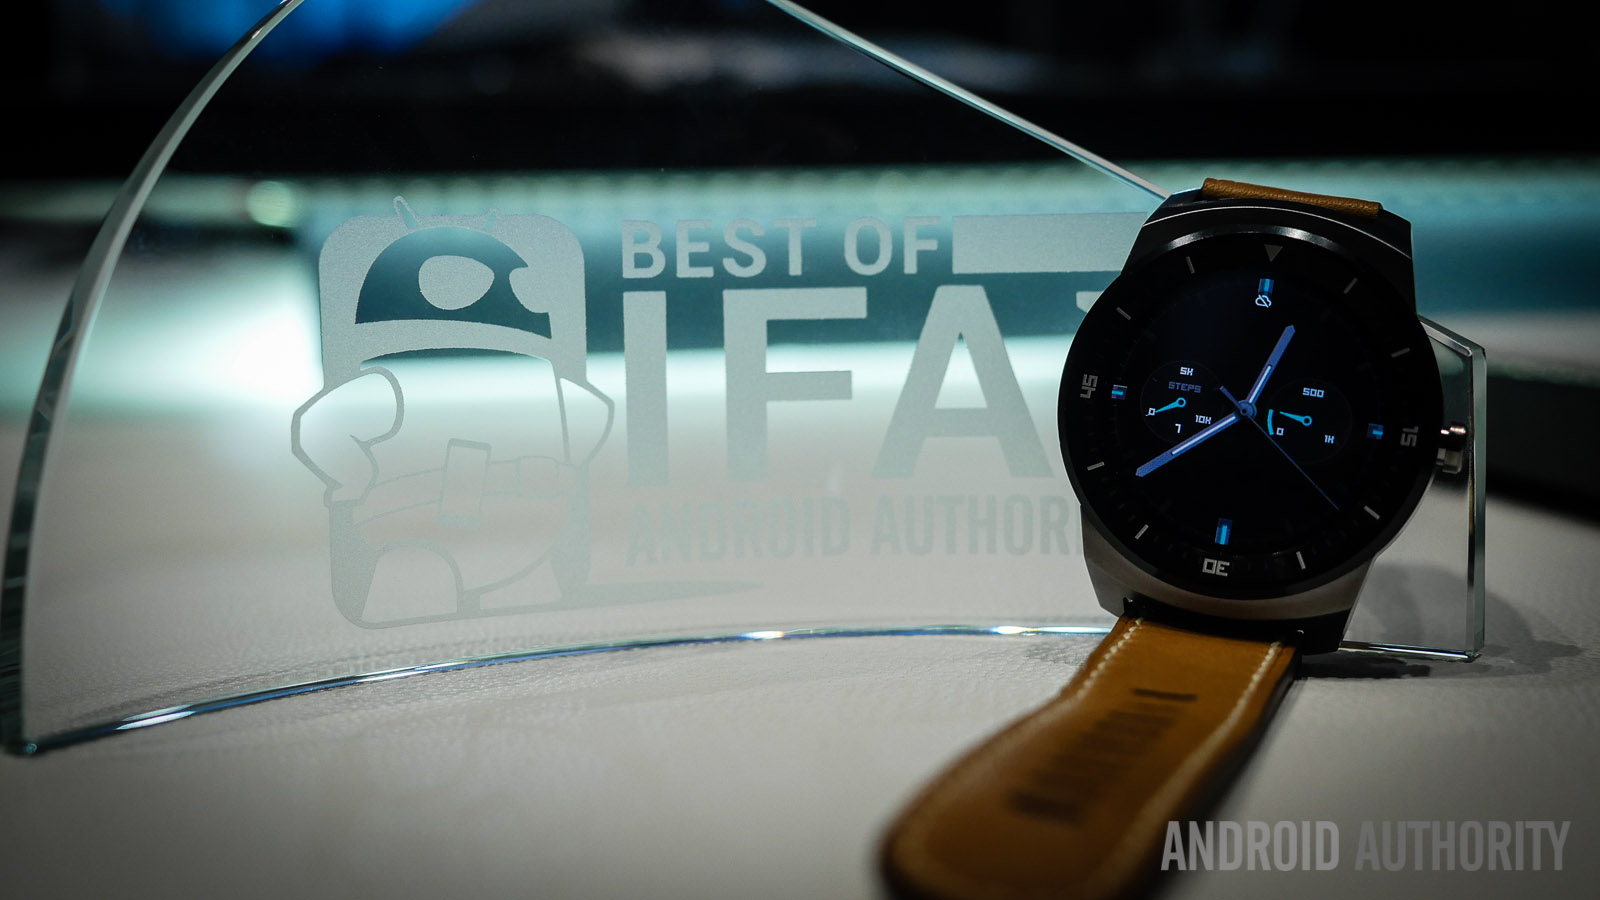 best of ifa 2014 awards (29 of 37)